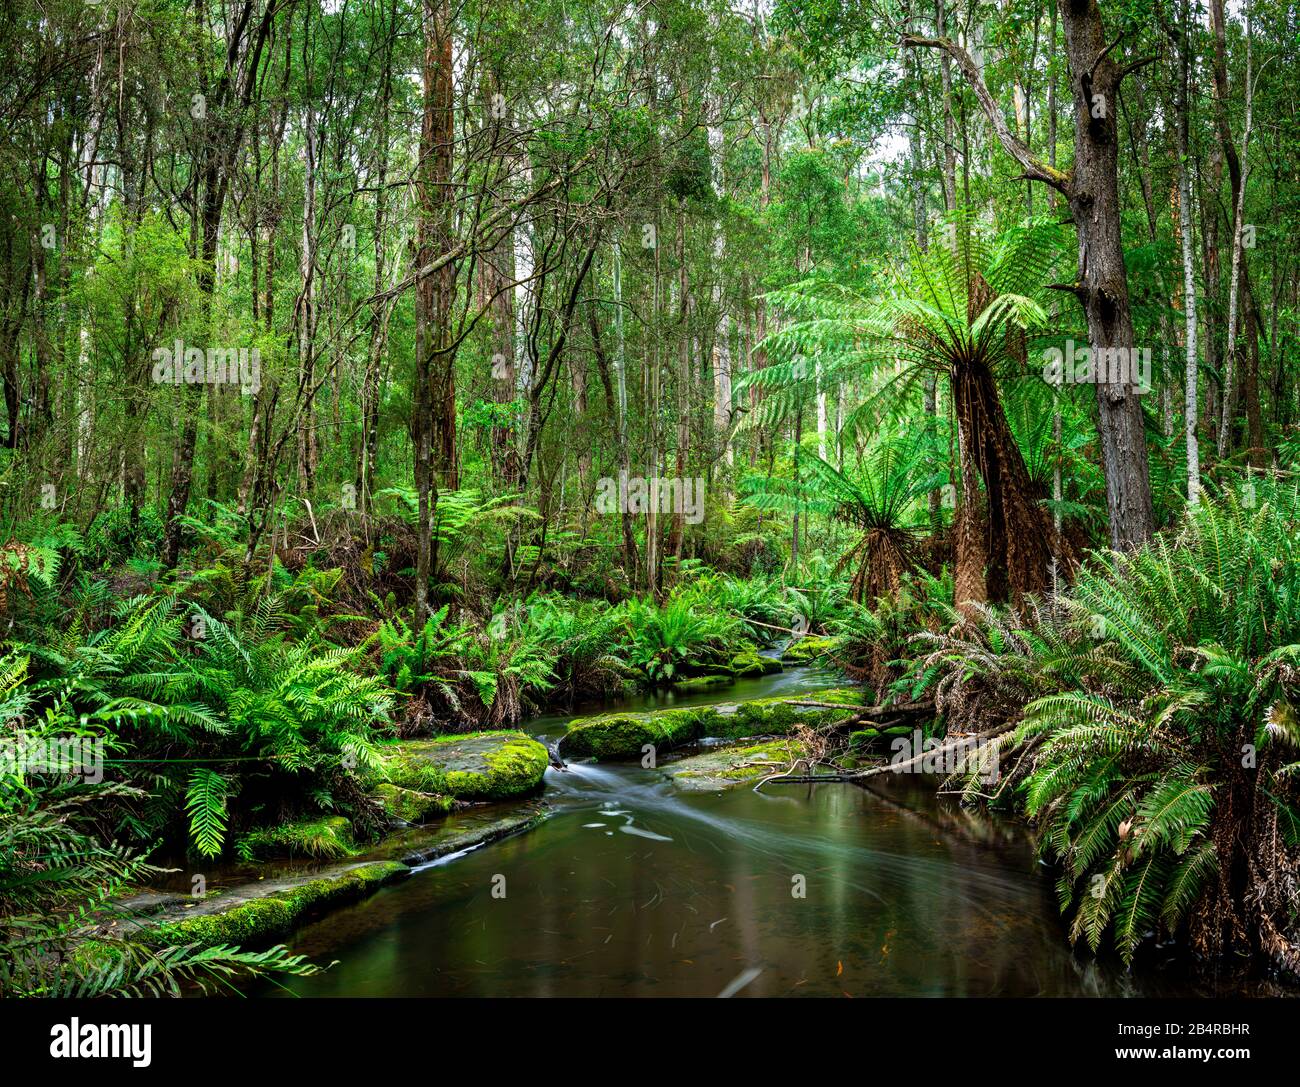 A stream through the rainforest in Great Otway National Park, along the Great Ocean Road region in Victoria, Australia. Stock Photo